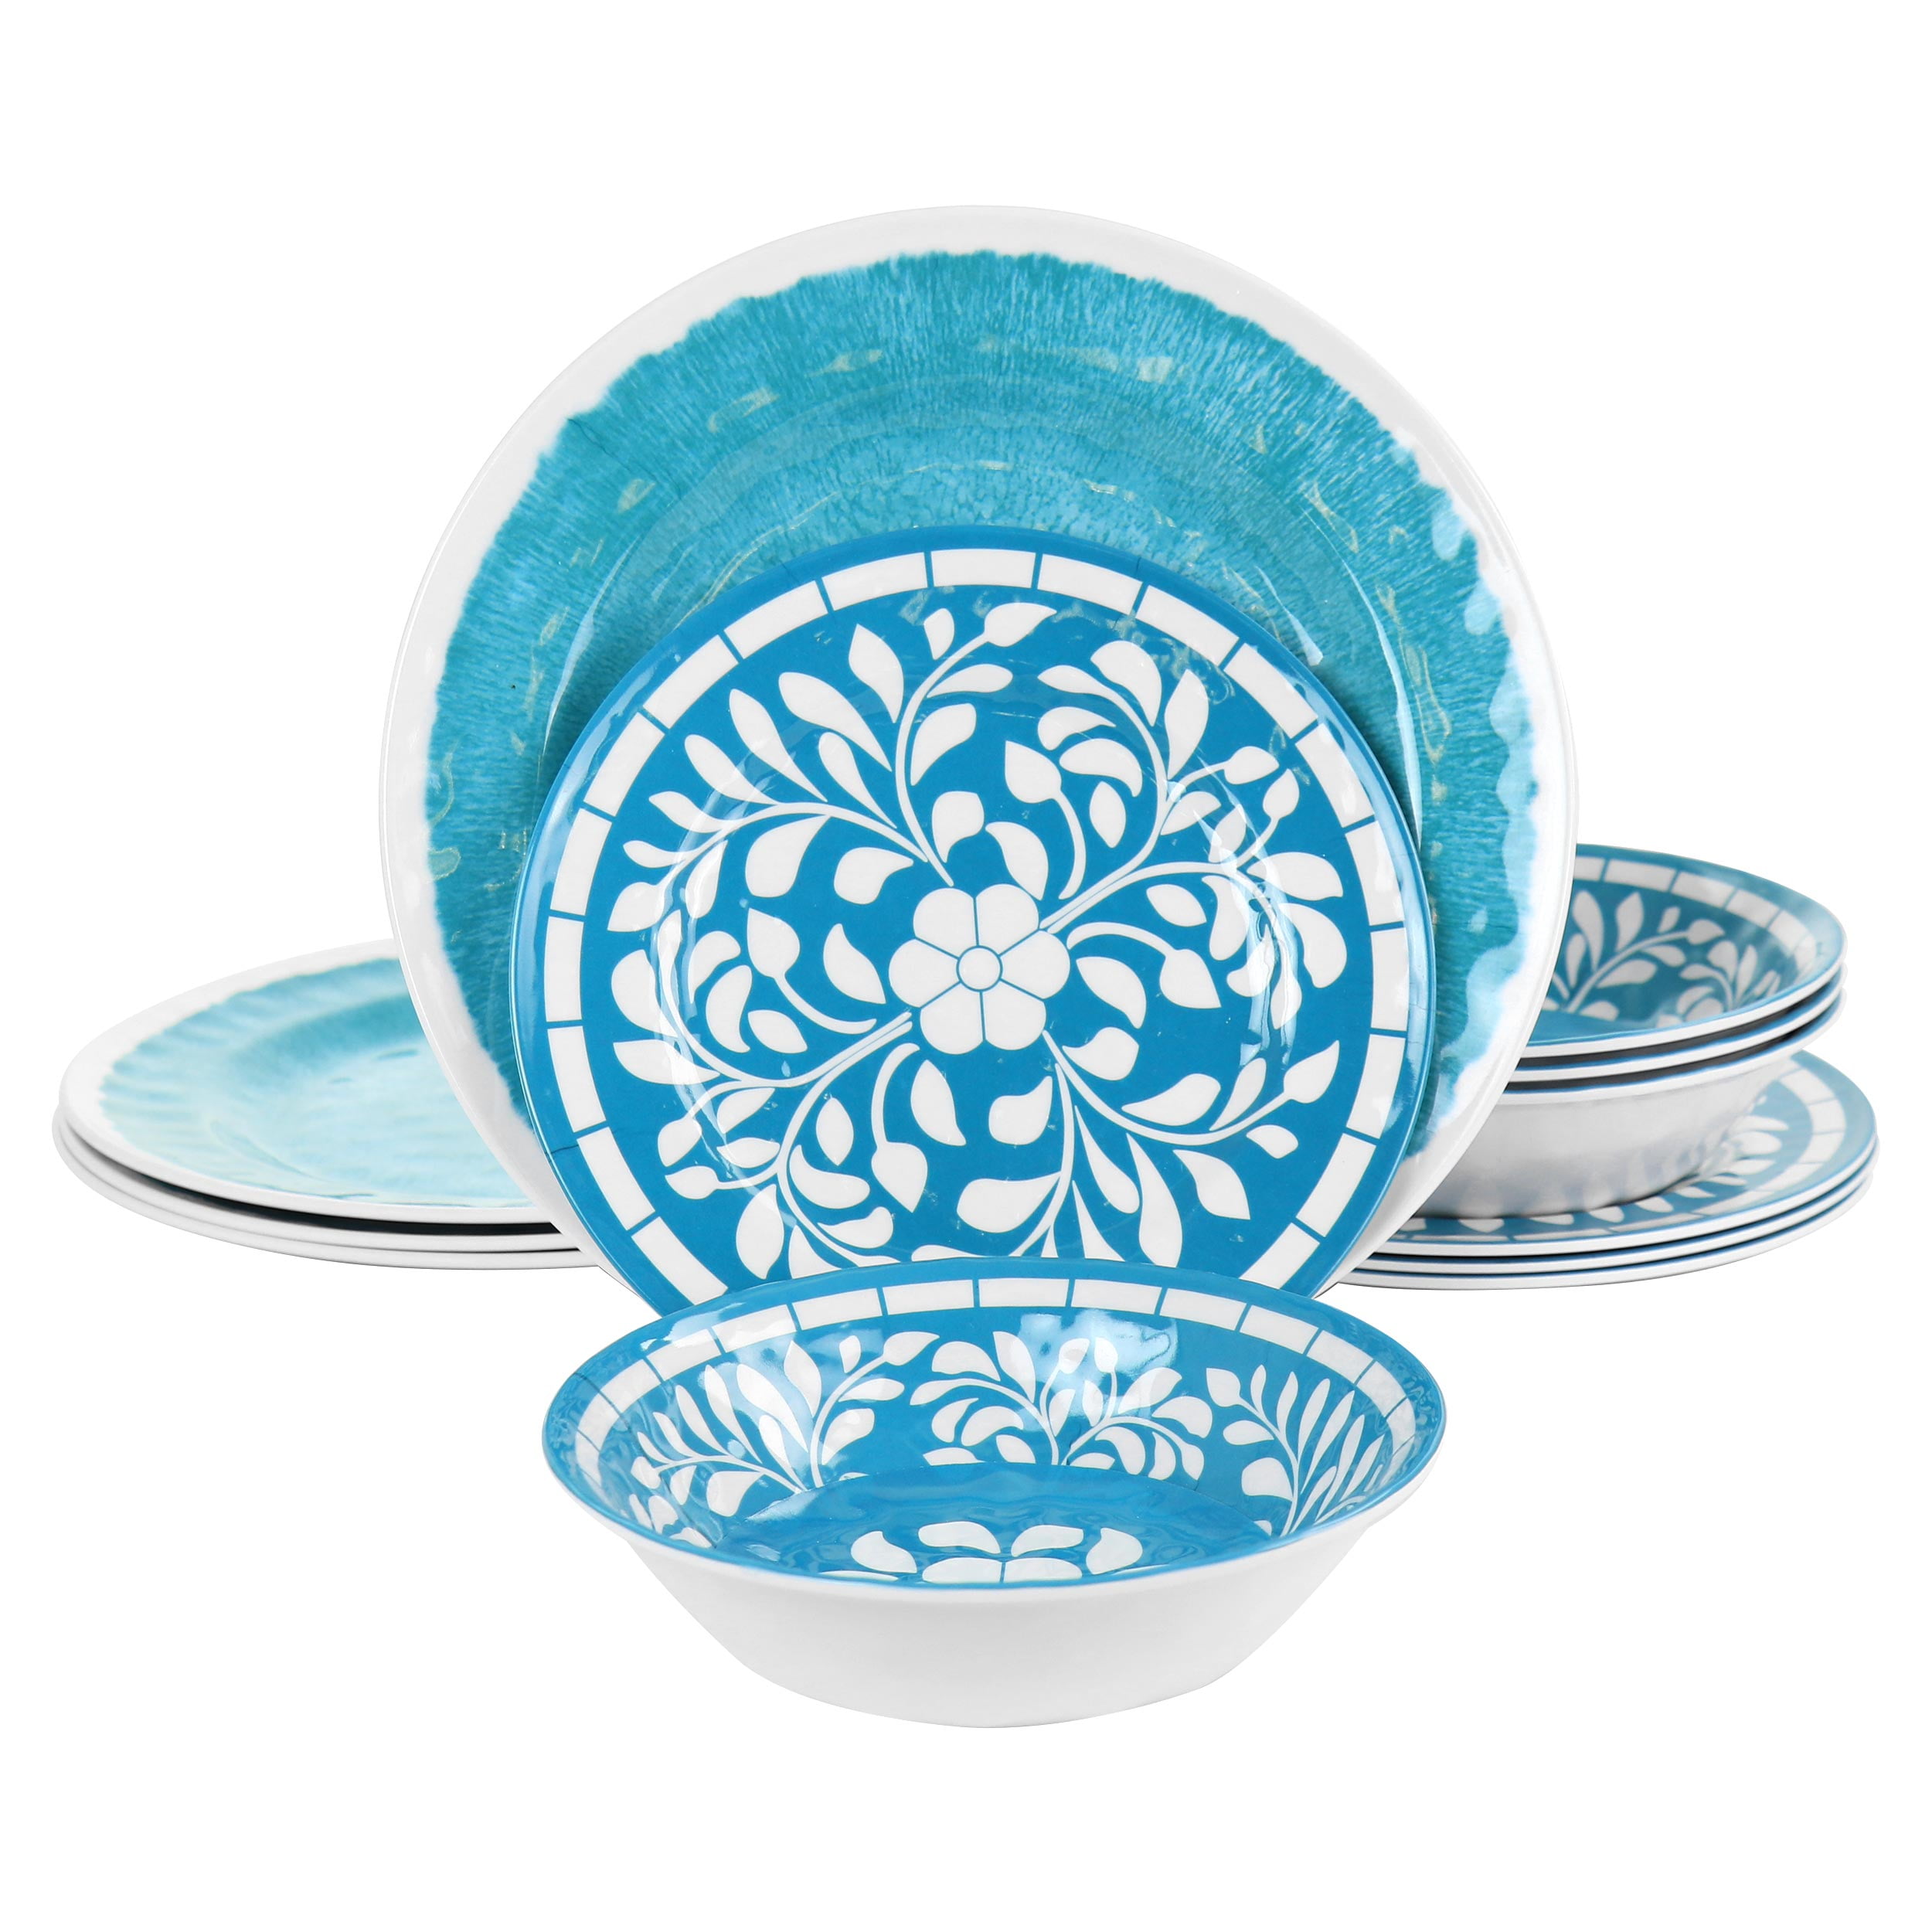 Suitable as Diningware & Display Chic Enamel Plate Featuring Blue Floral Print 